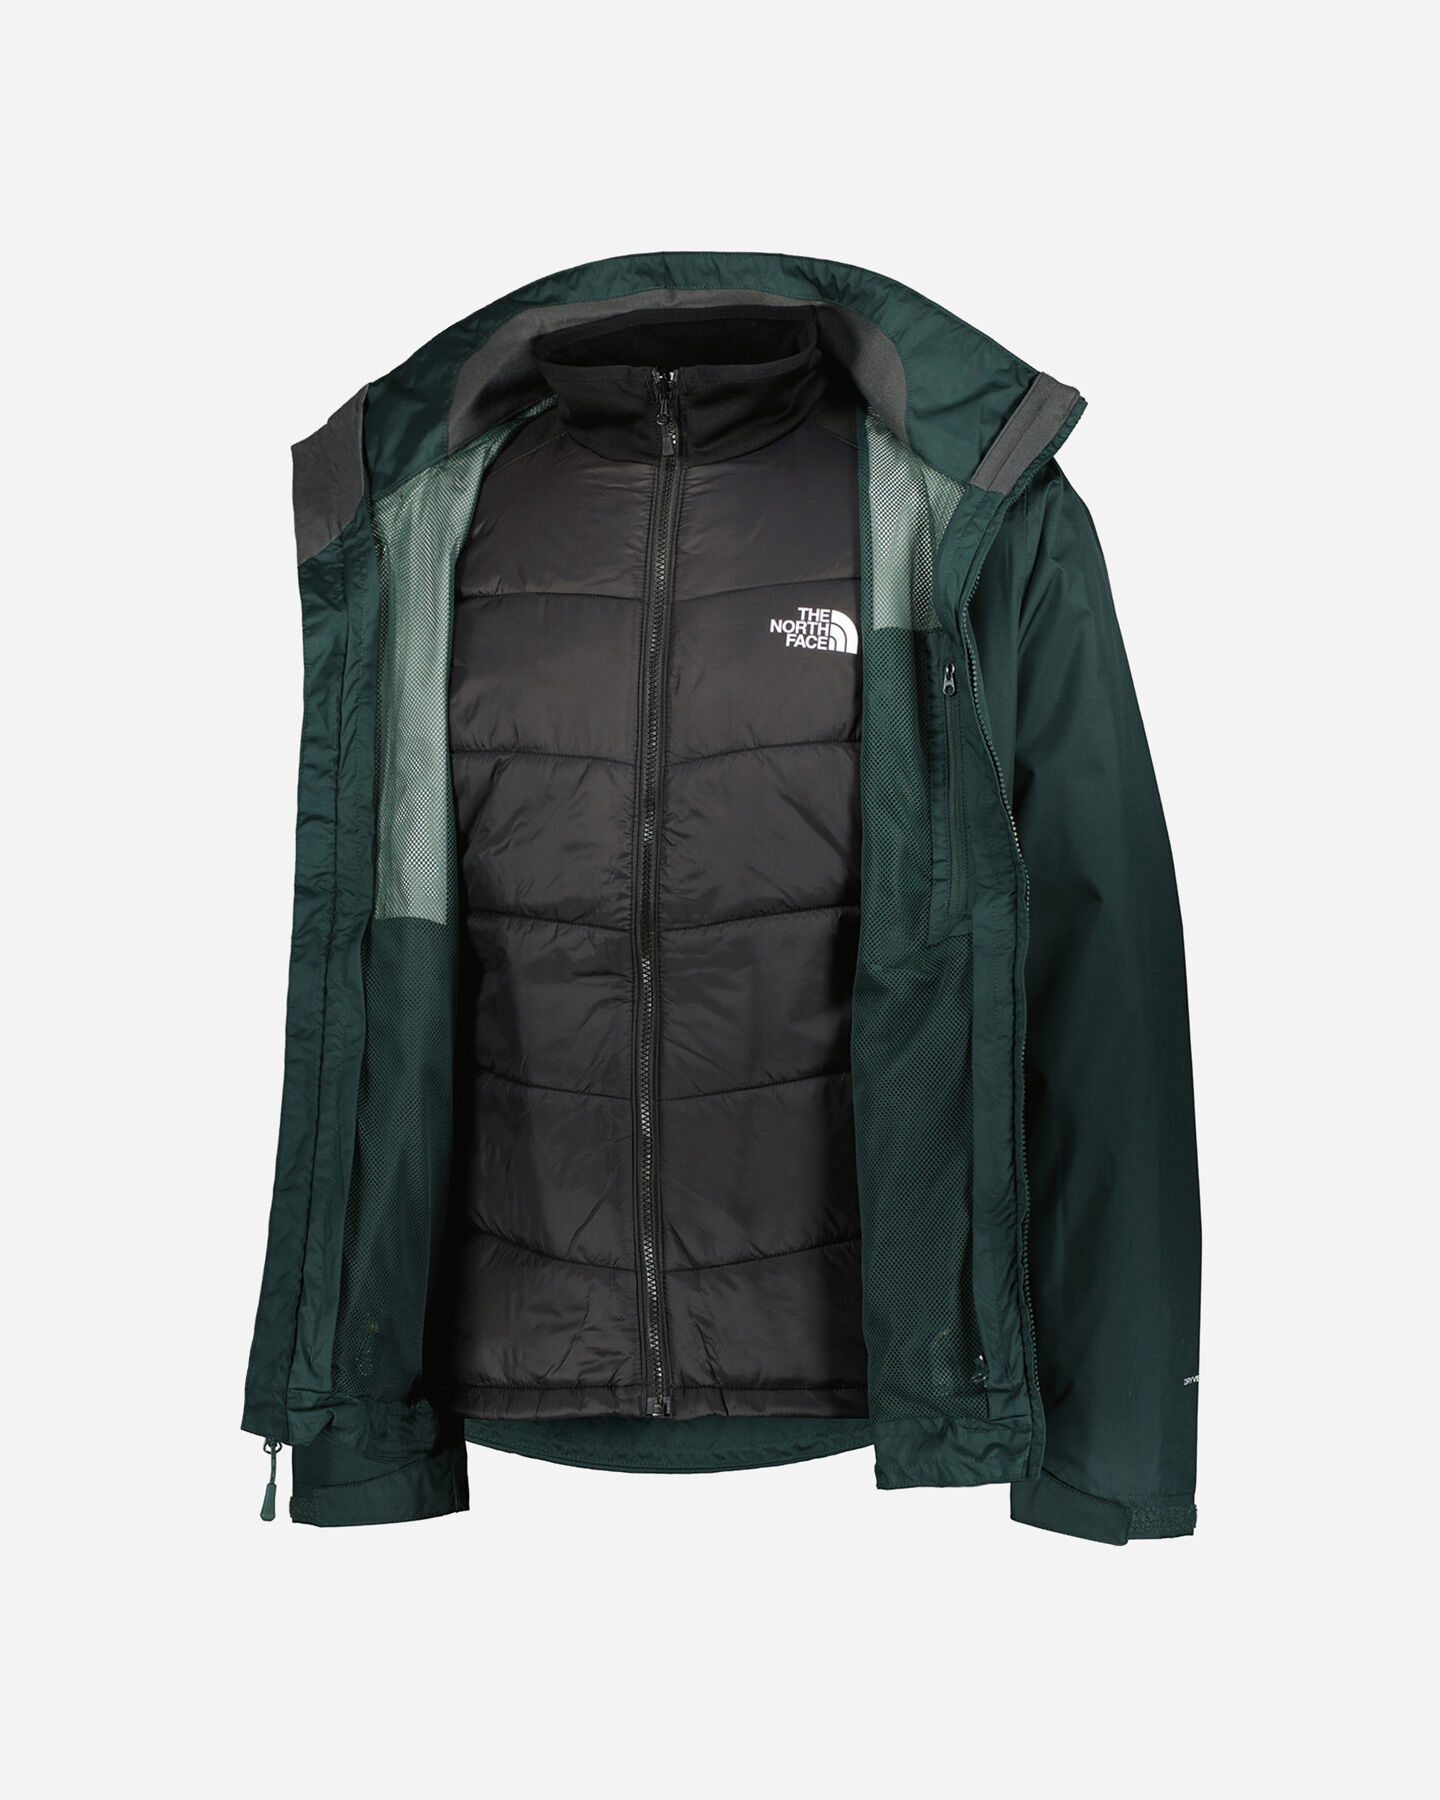  Giacca outdoor THE NORTH FACE ARASHI II DK SAGE TRICLIMATE M S5347145|D0R|S scatto 1